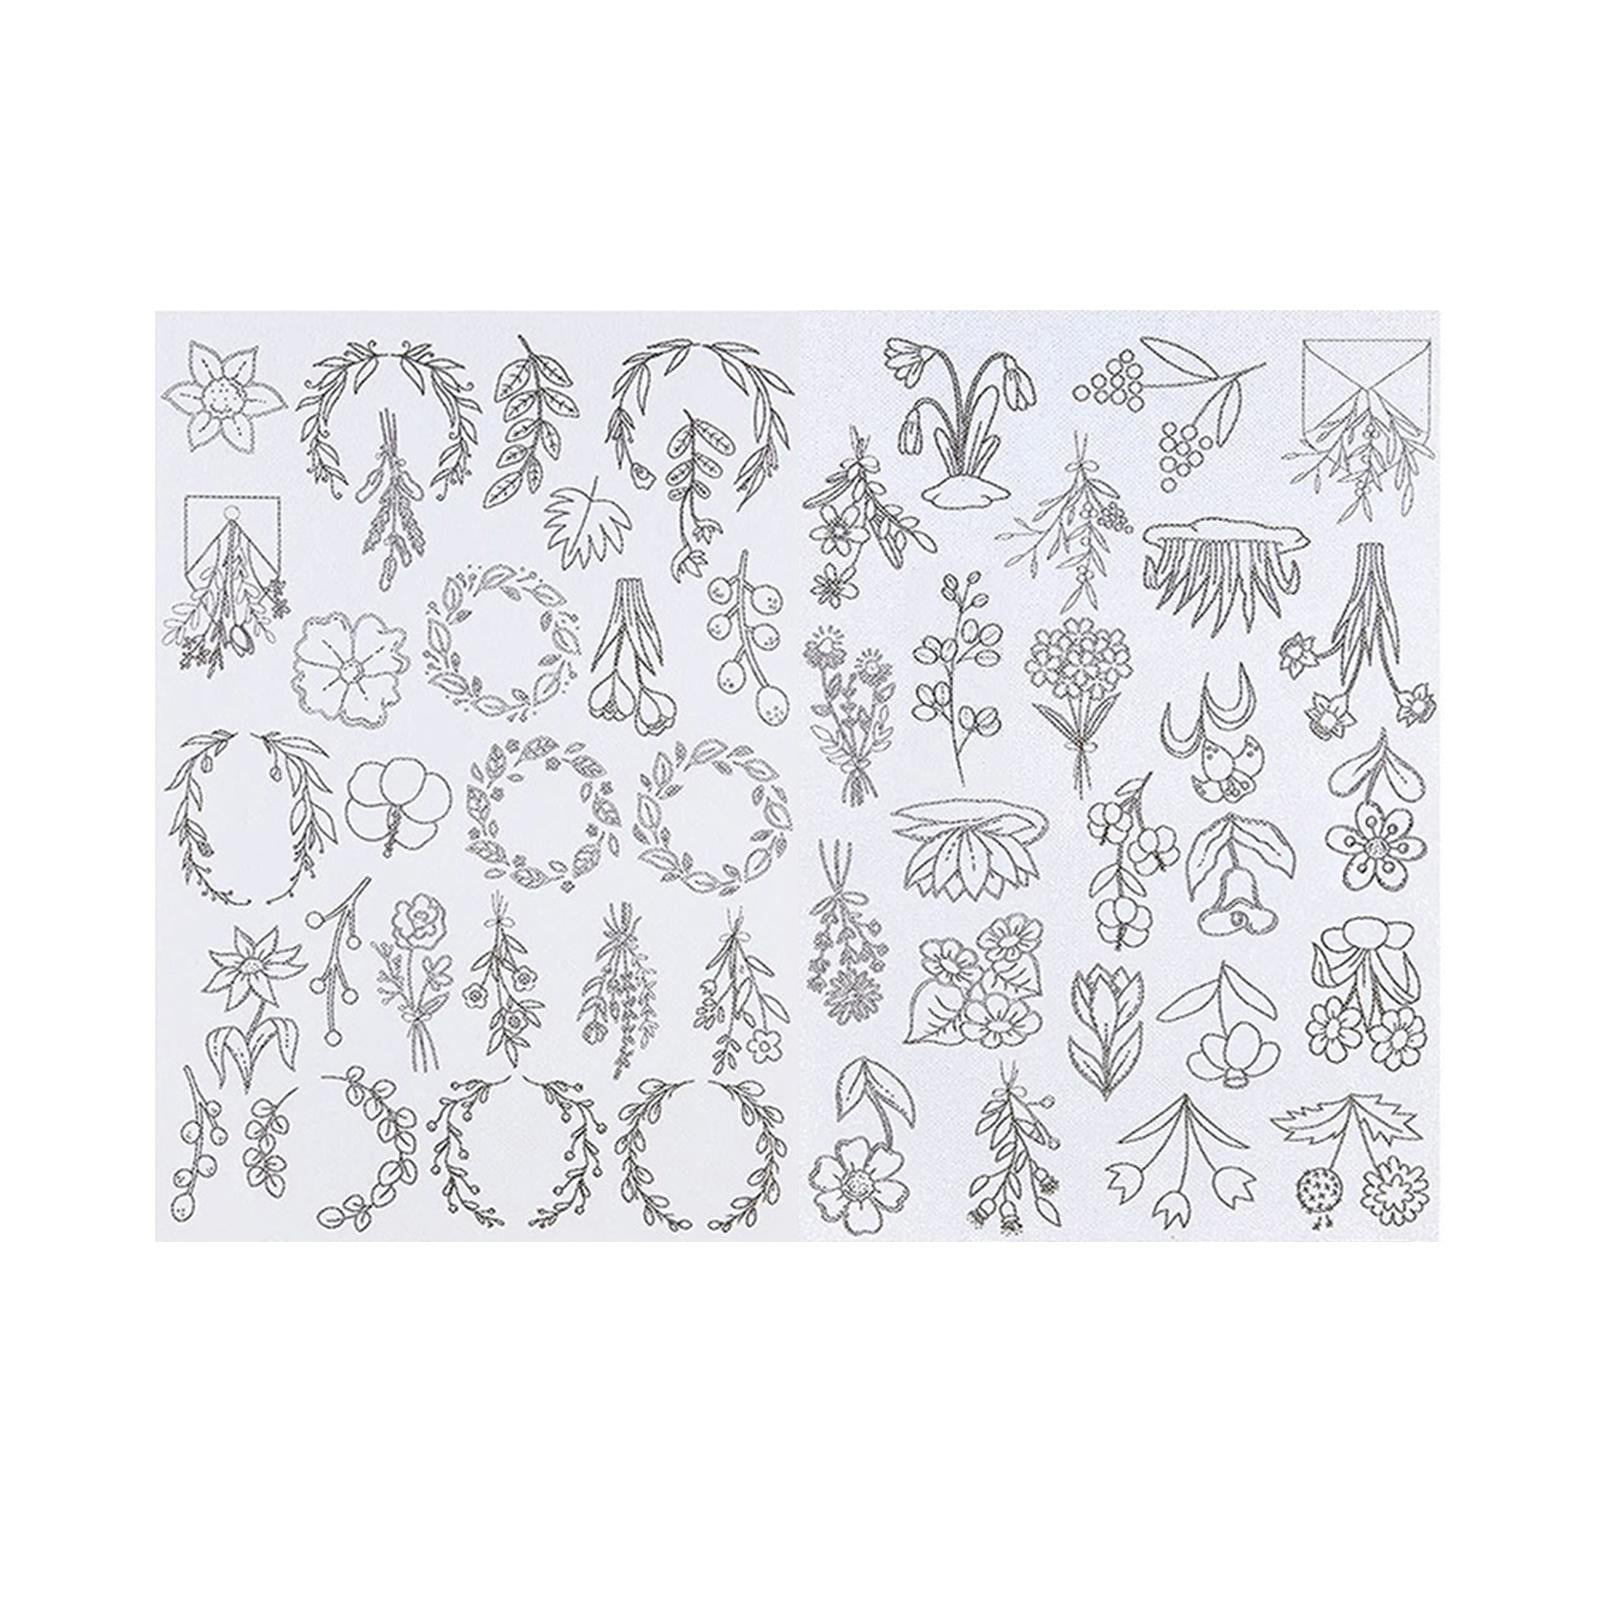 30yd Water Soluble Embroidery Stabilizer Transfer Paper DIY Embroidery Craft, Size: 20cm 30Yard, White